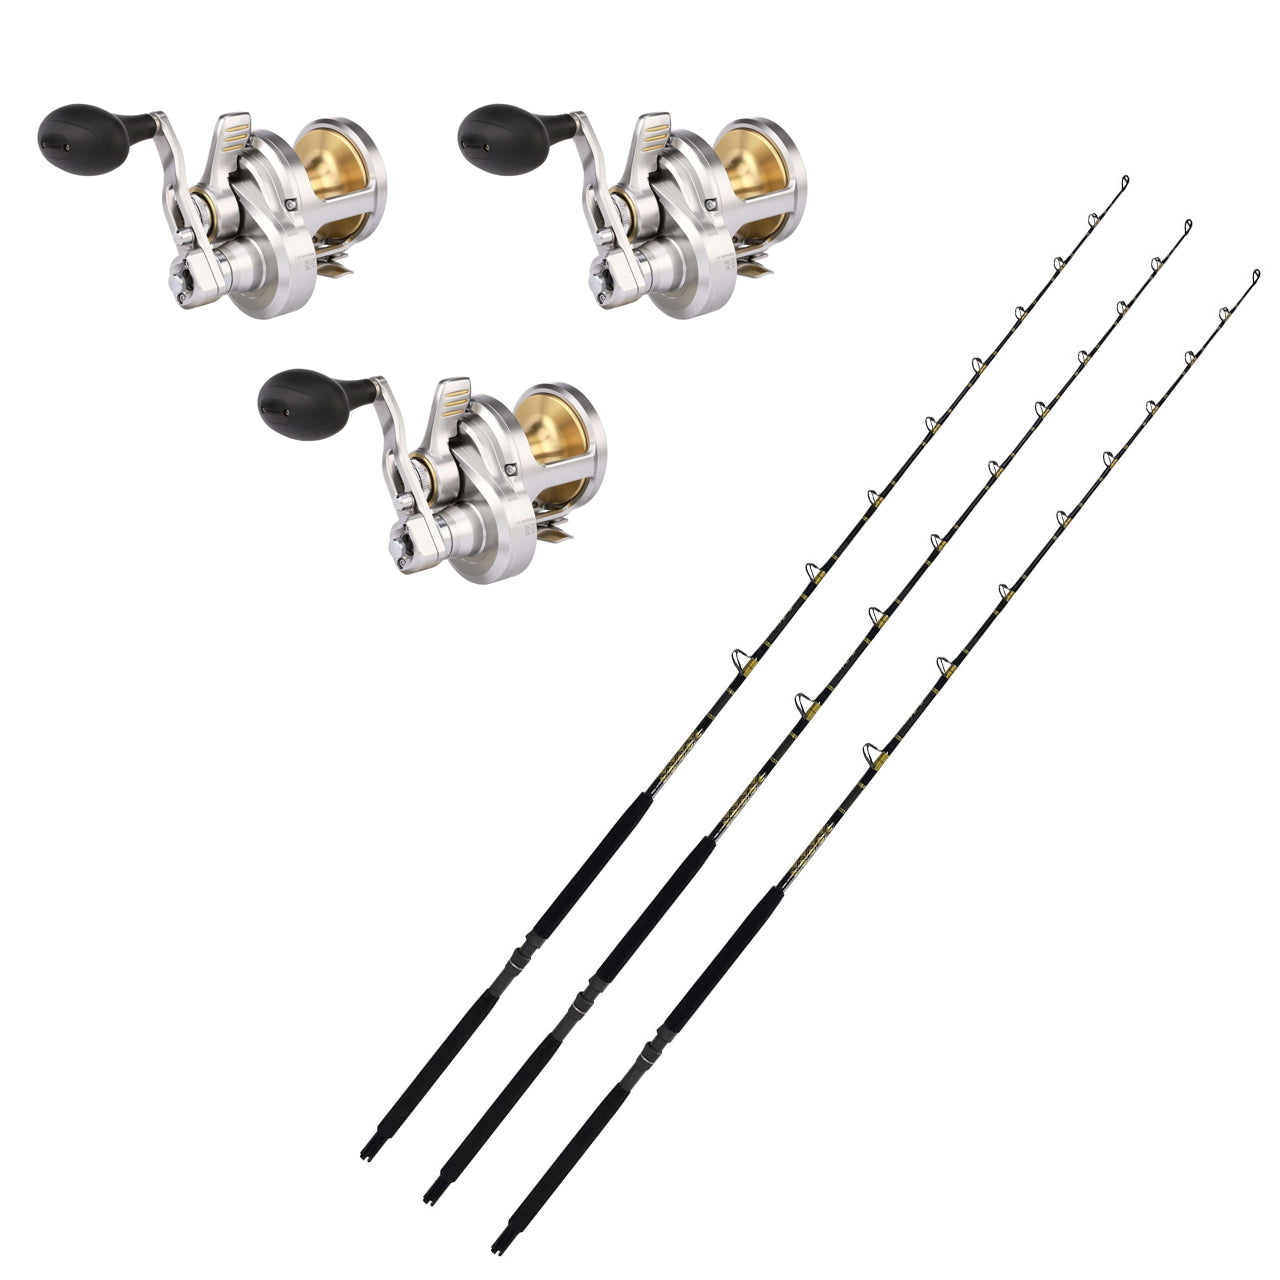 Alltackle Kite Kit w/ Dual Trident Rod Holders and Kite Combos 